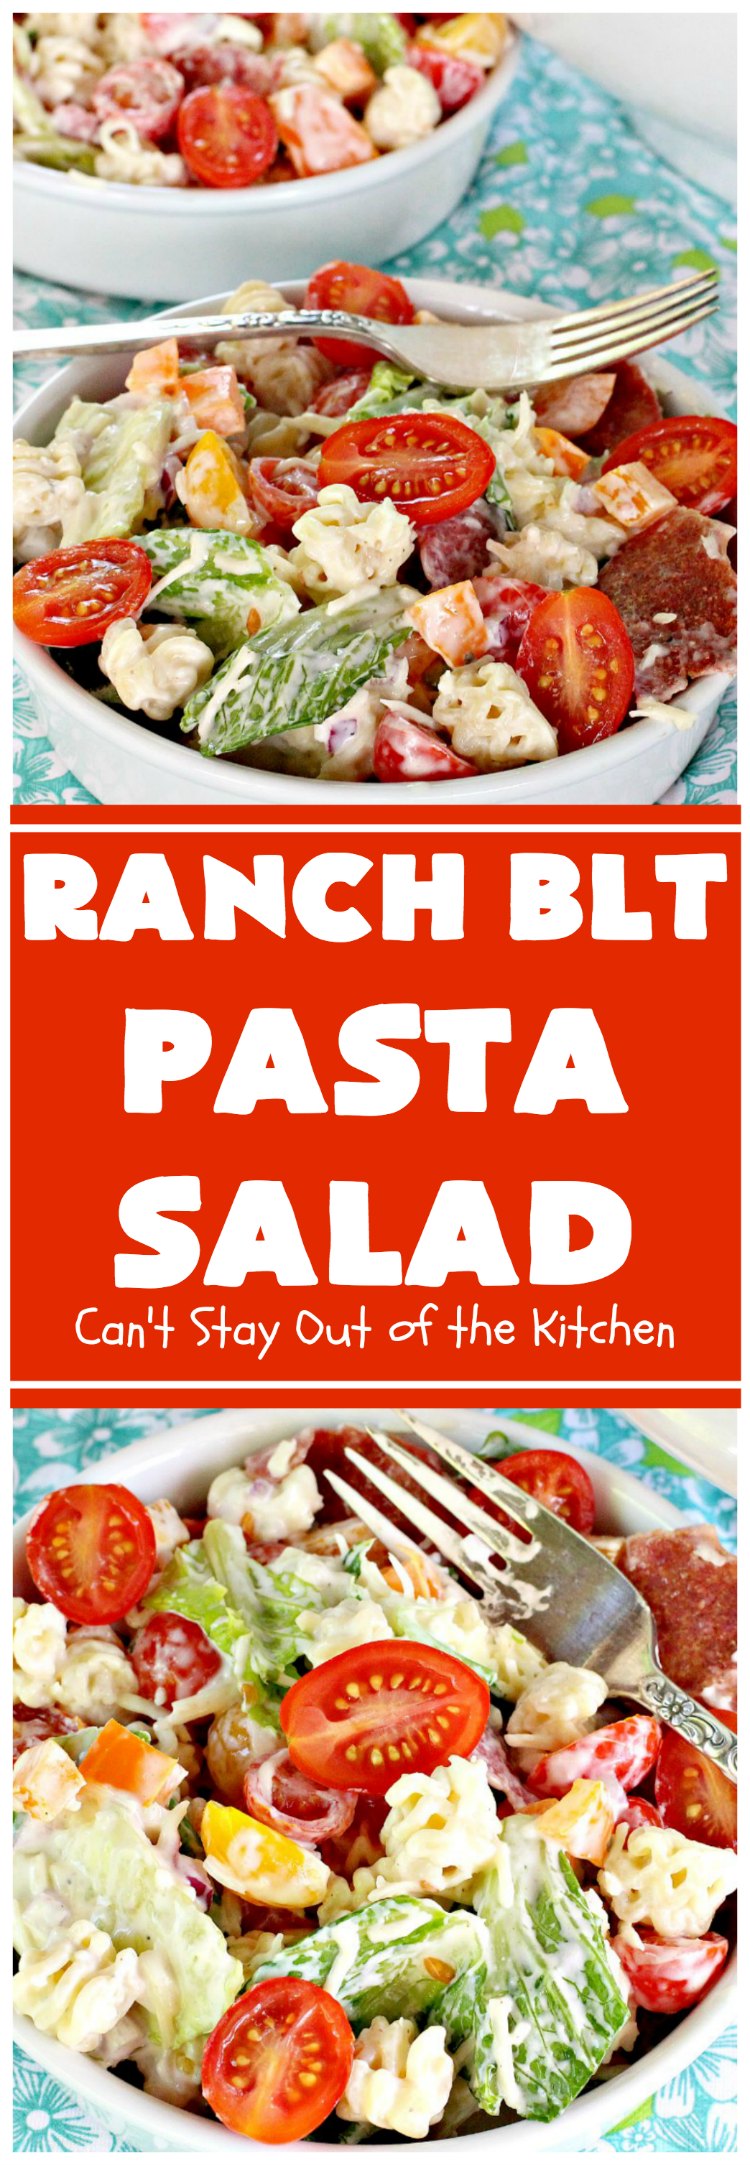 Ranch BLT Pasta Salad | Can't Stay Out of the Kitchen